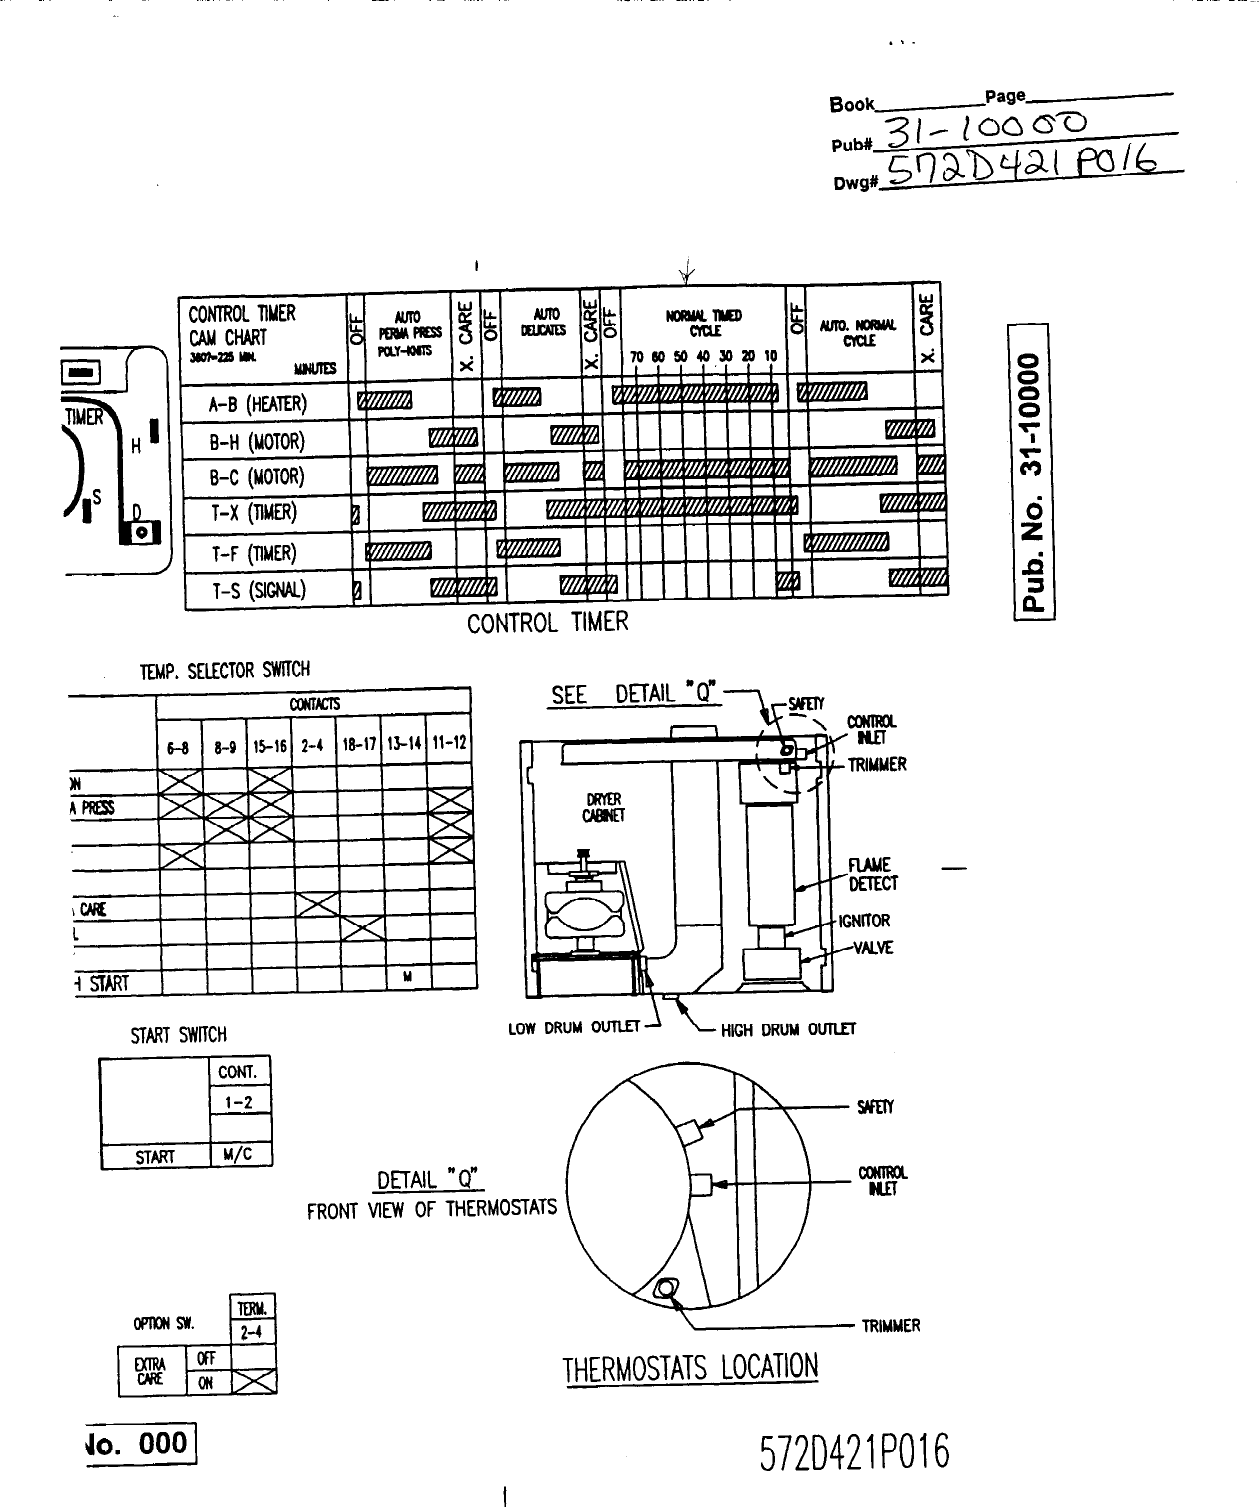 Page 2 of 2 - Friday, March 26, 2004.max  GE Dryer Schematic 31-10000